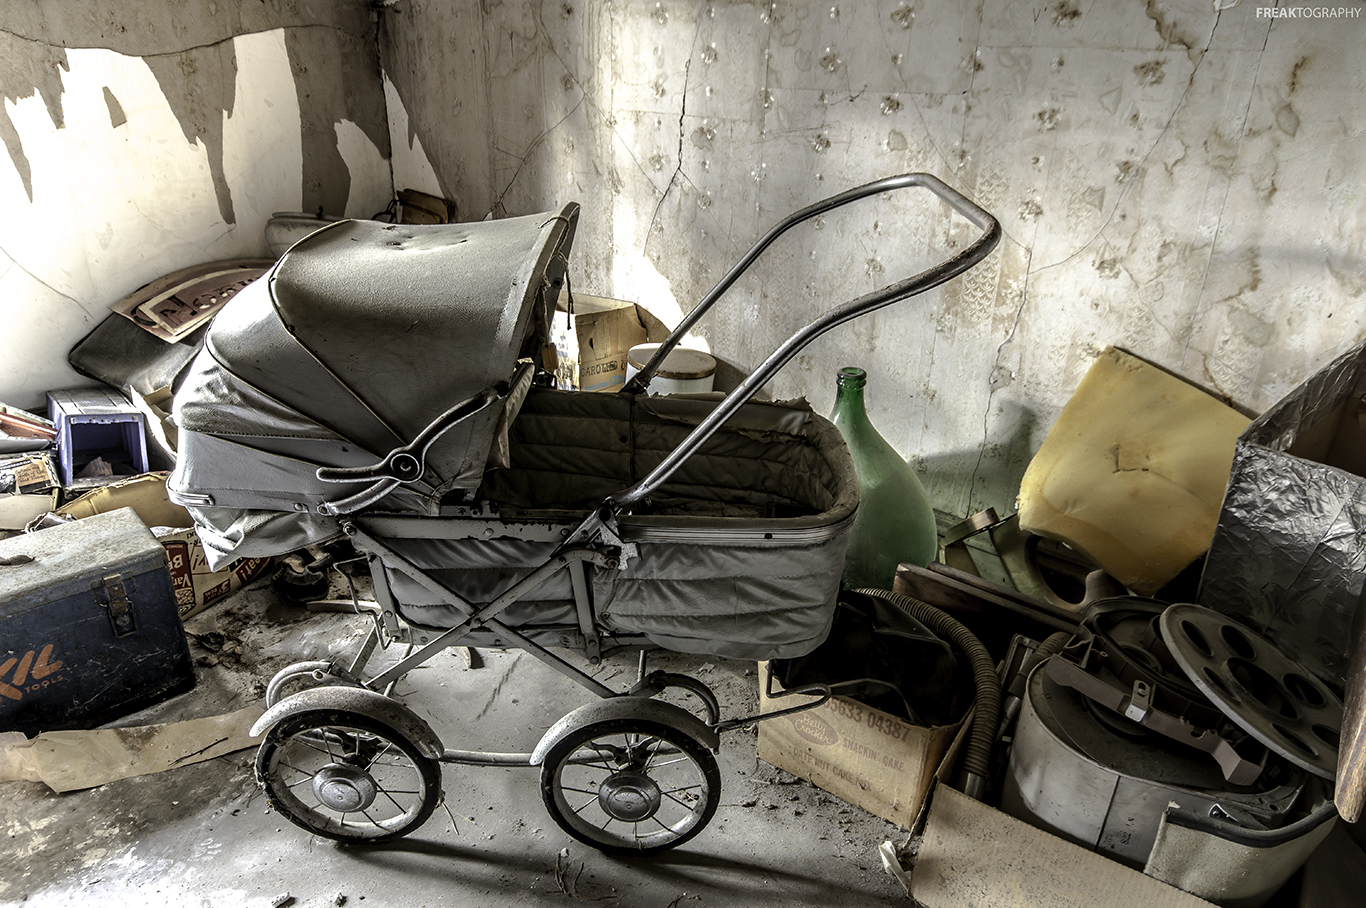 An antique pram found in the upstairs of an abandoned house in Ontario. www.freaktography.ca Ello | Facebook |  Twitter |  Instagram |  500px |  Tumblr |  Pinterest |